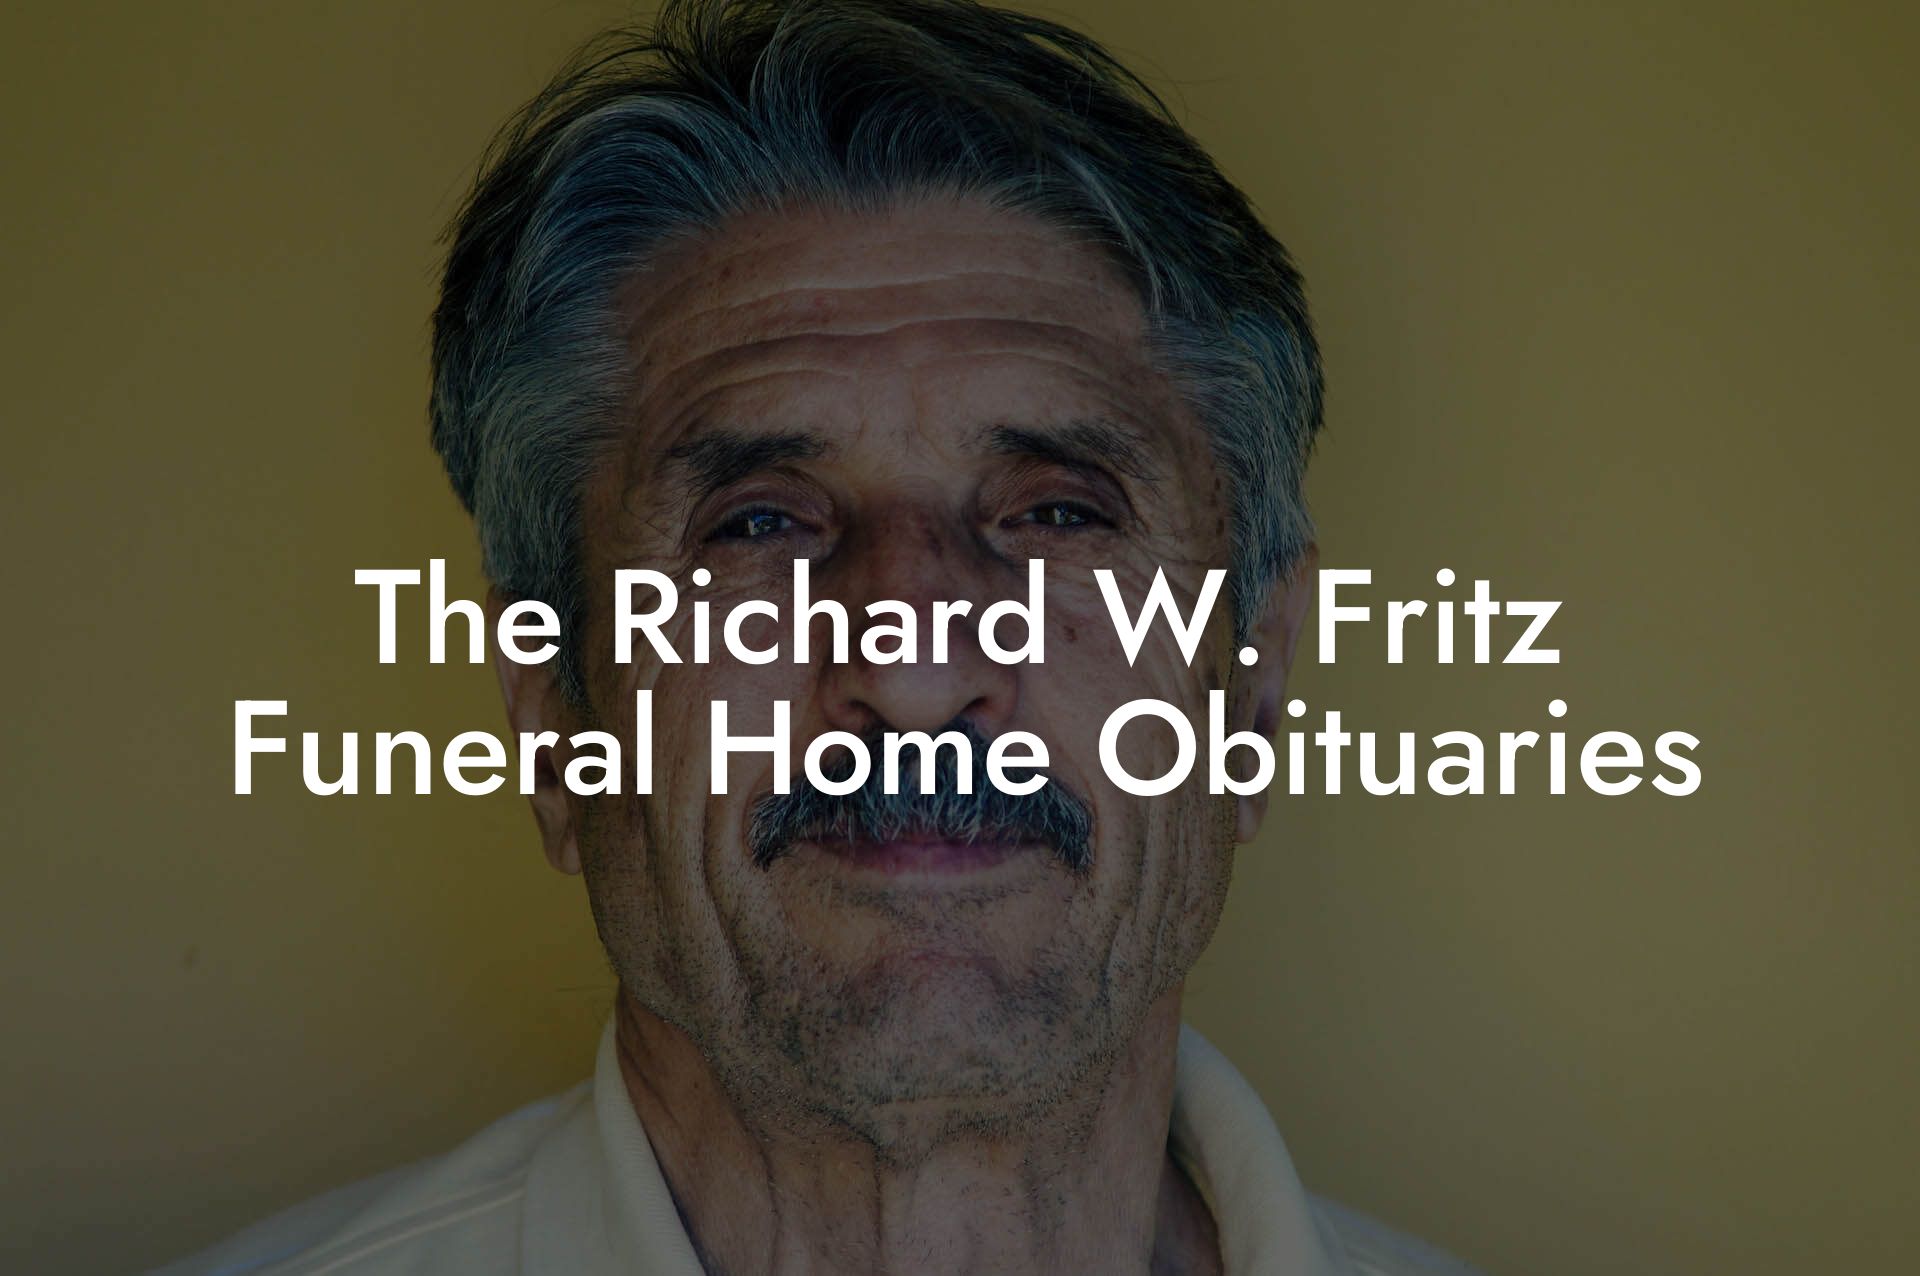 The Richard W. Fritz Funeral Home Obituaries